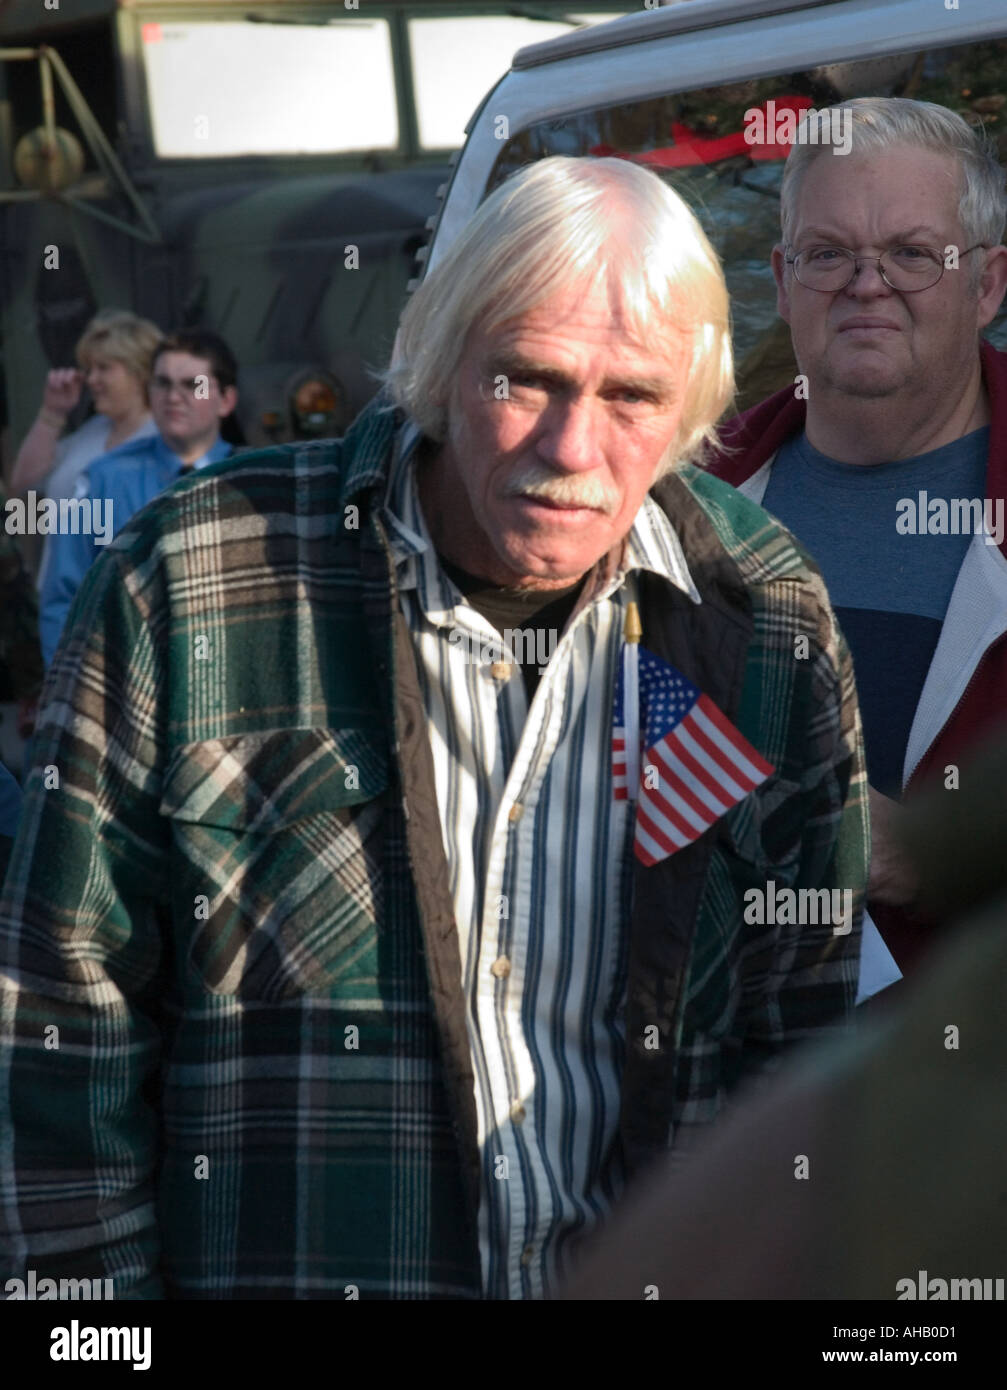 Caucasian Man 60-65 Yrs.With White Hair and US flag in Pocket Watches Ceremony of National Guard Unit Deployment to Iraq USA Stock Photo